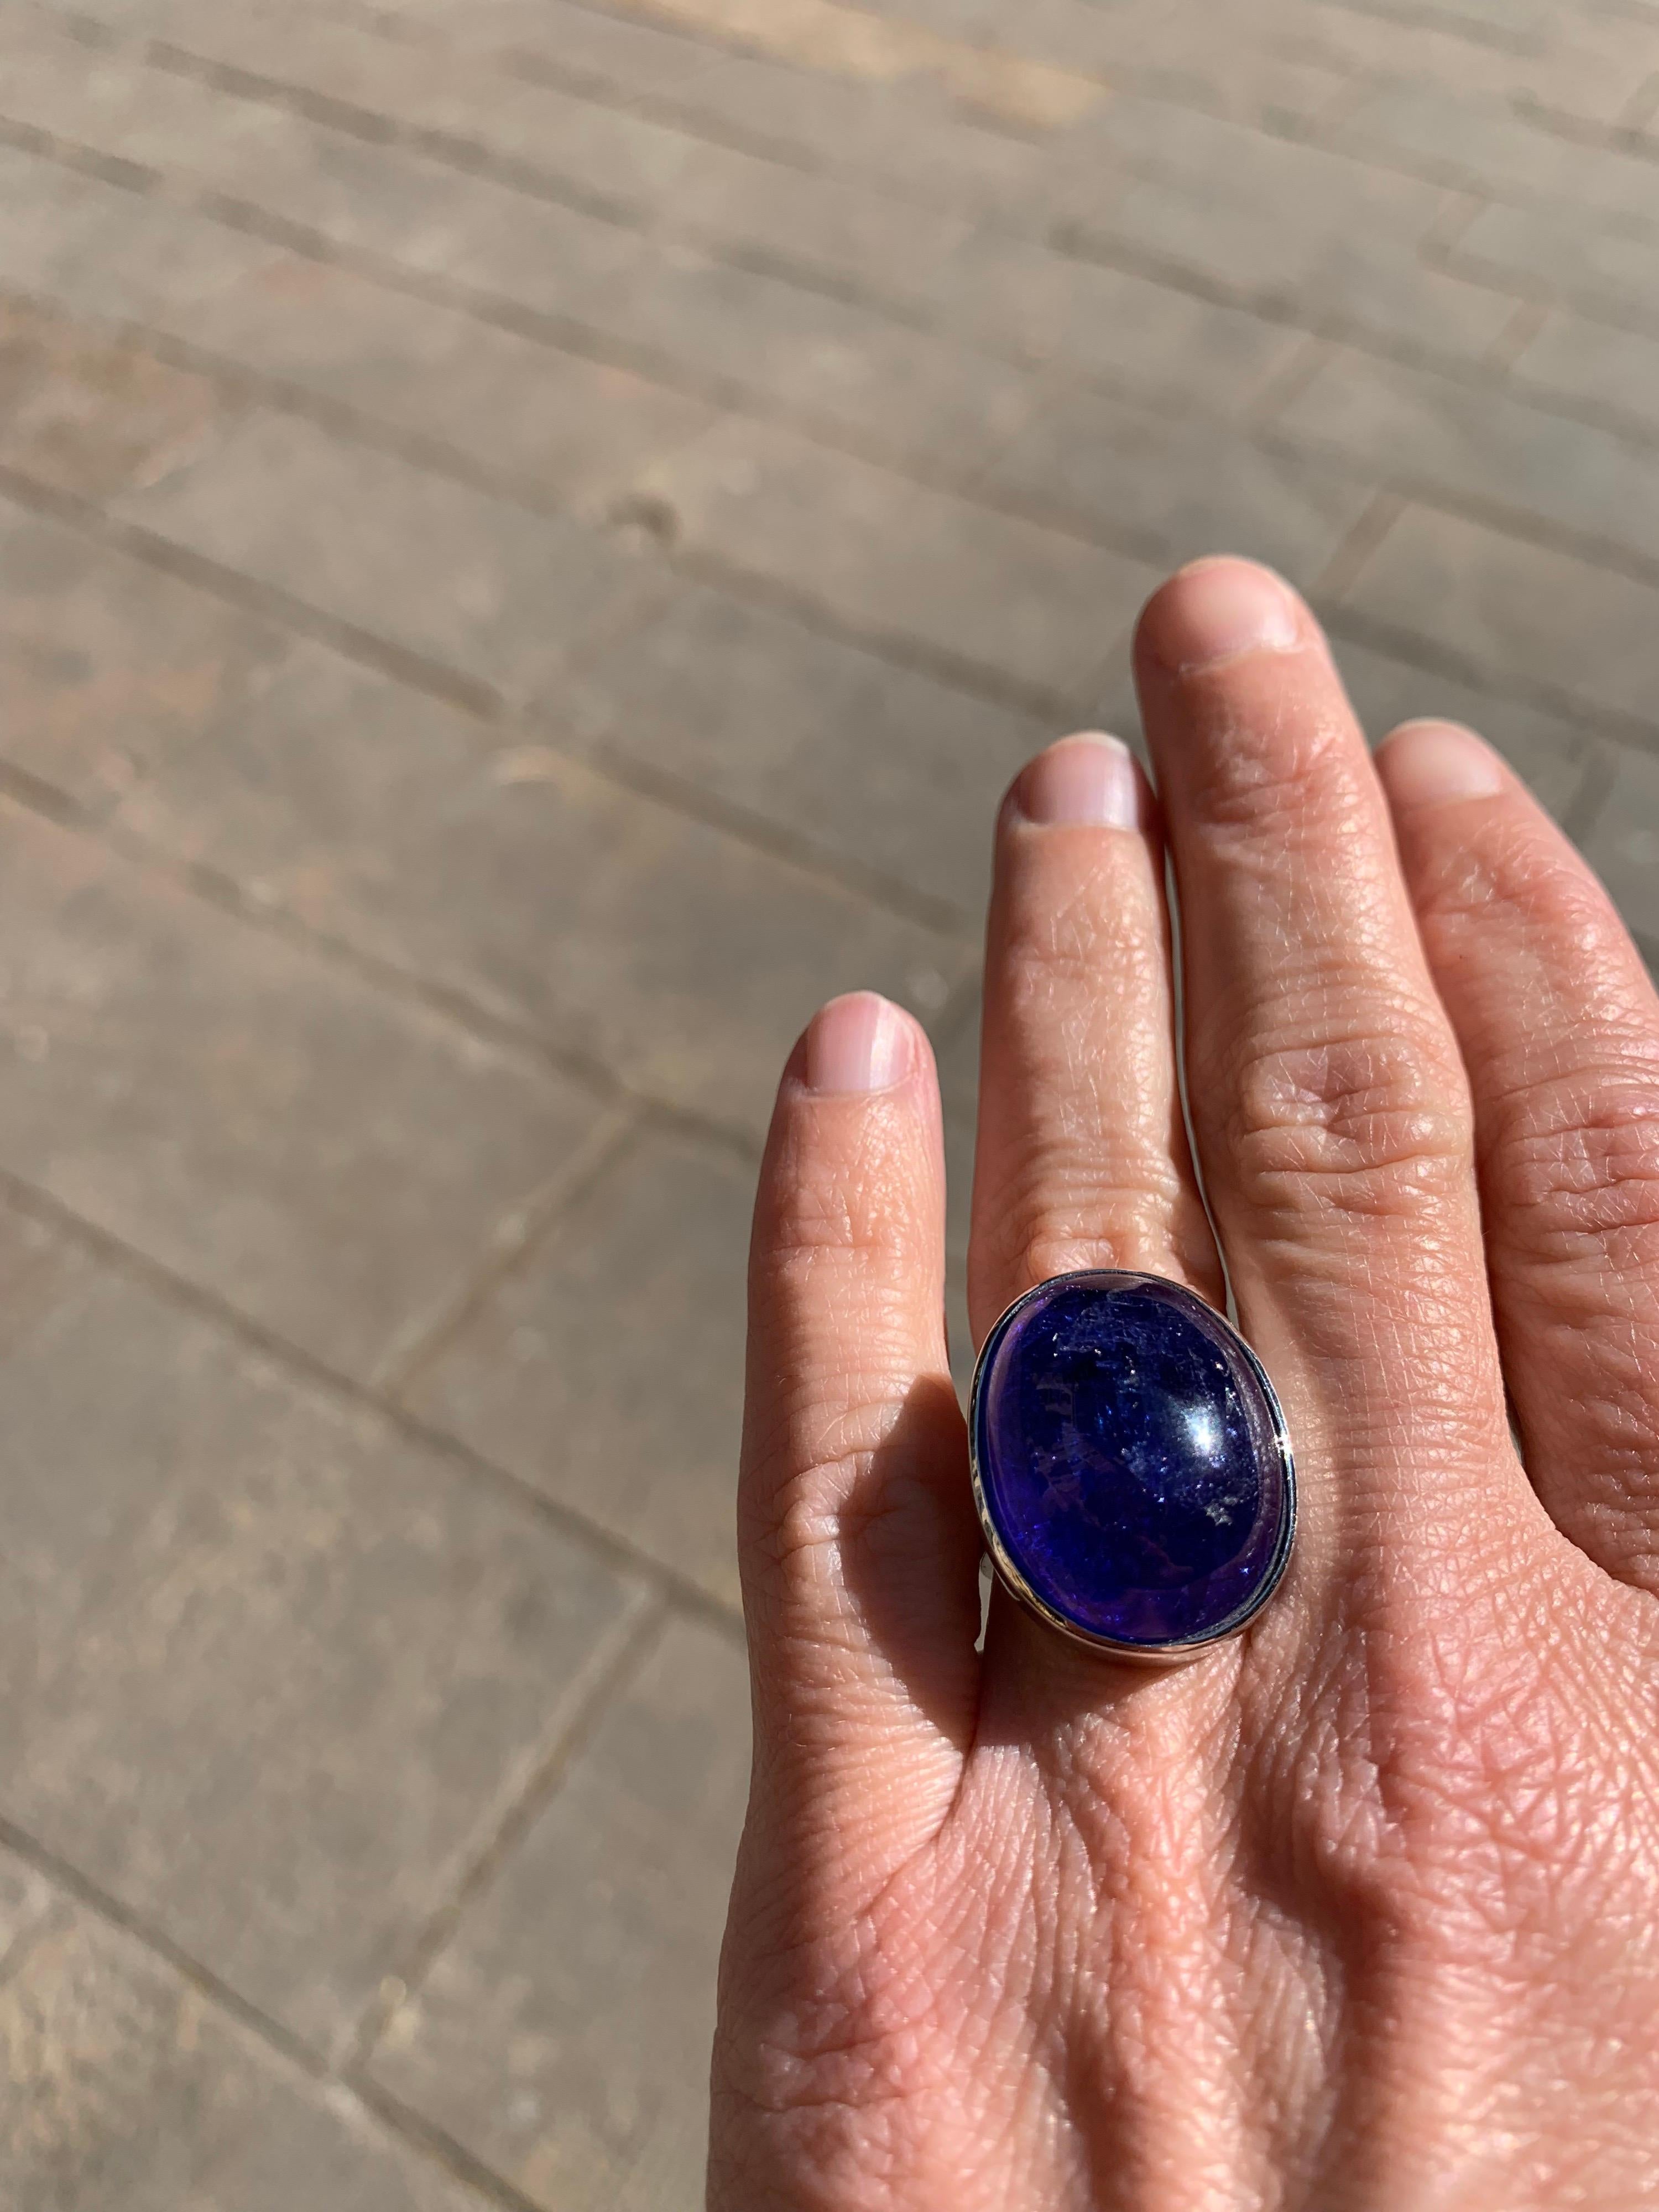 This ring is handmade in 18k white gold with a cabochon-cut tanzanite.
Its current standard size is   , but it can be resized to any size.
Designed and handmade in Barcelona.